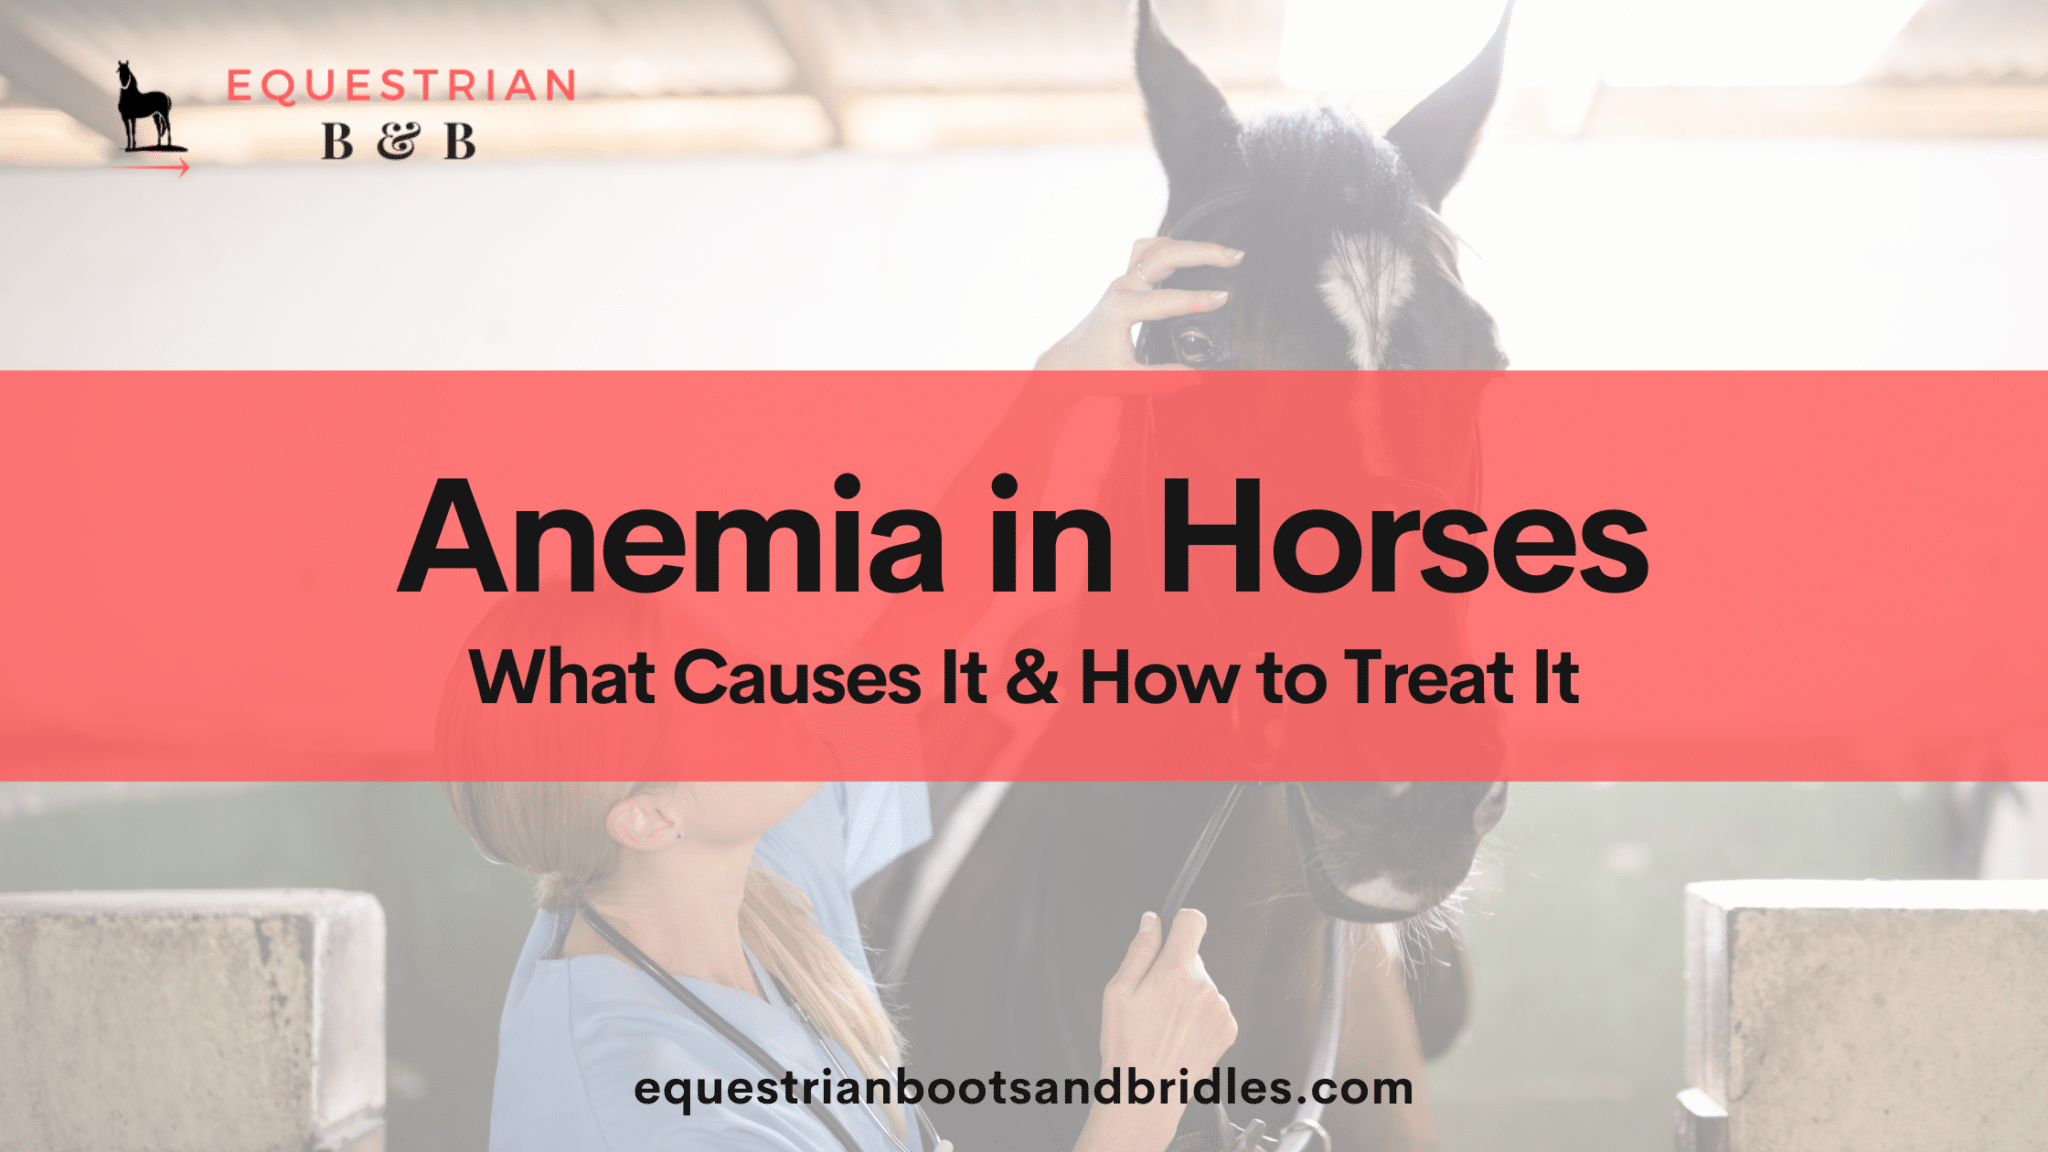 anemia in horses on equestrianbootsandbridles.com